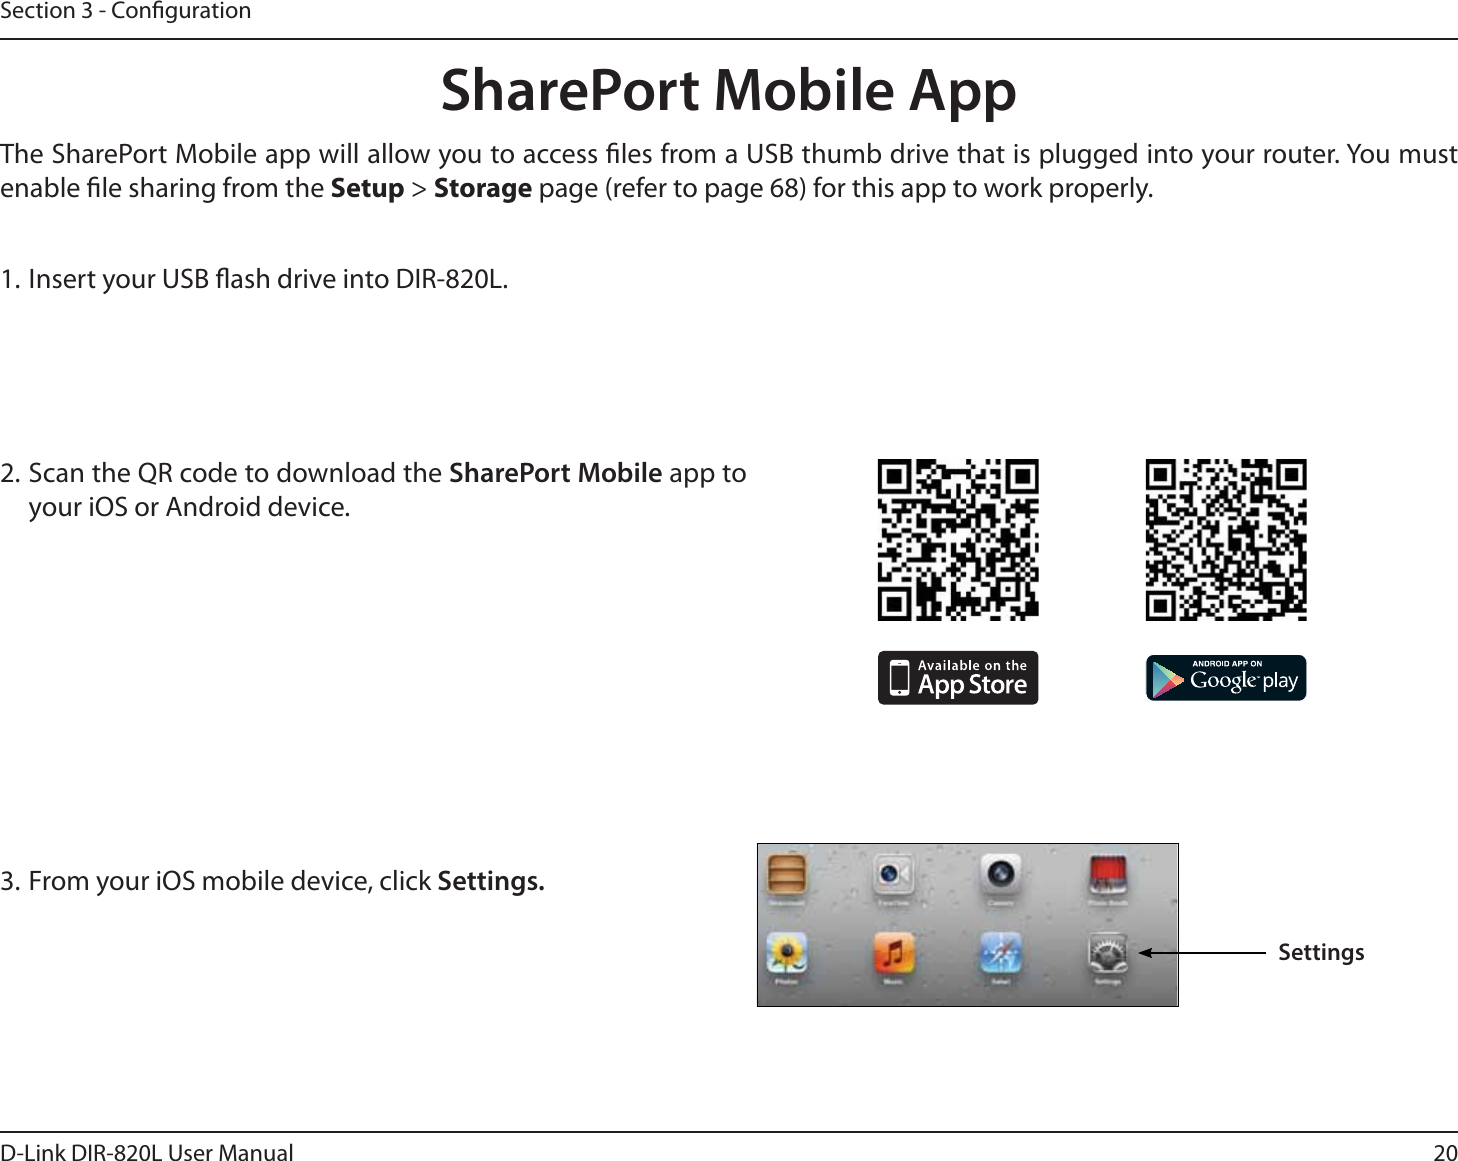 20D-Link DIR-820L User ManualSection 3 - Conguration1. Insert your USB ash drive into DIR-820L.2. Scan the QR code to download the SharePort Mobile app to your iOS or Android device.SharePort Mobile App3. From your iOS mobile device, click Settings. The SharePort Mobile app will allow you to access les from a USB thumb drive that is plugged into your router. You must enable le sharing from the Setup &gt; Storage page (refer to page 68) for this app to work properly.Settings